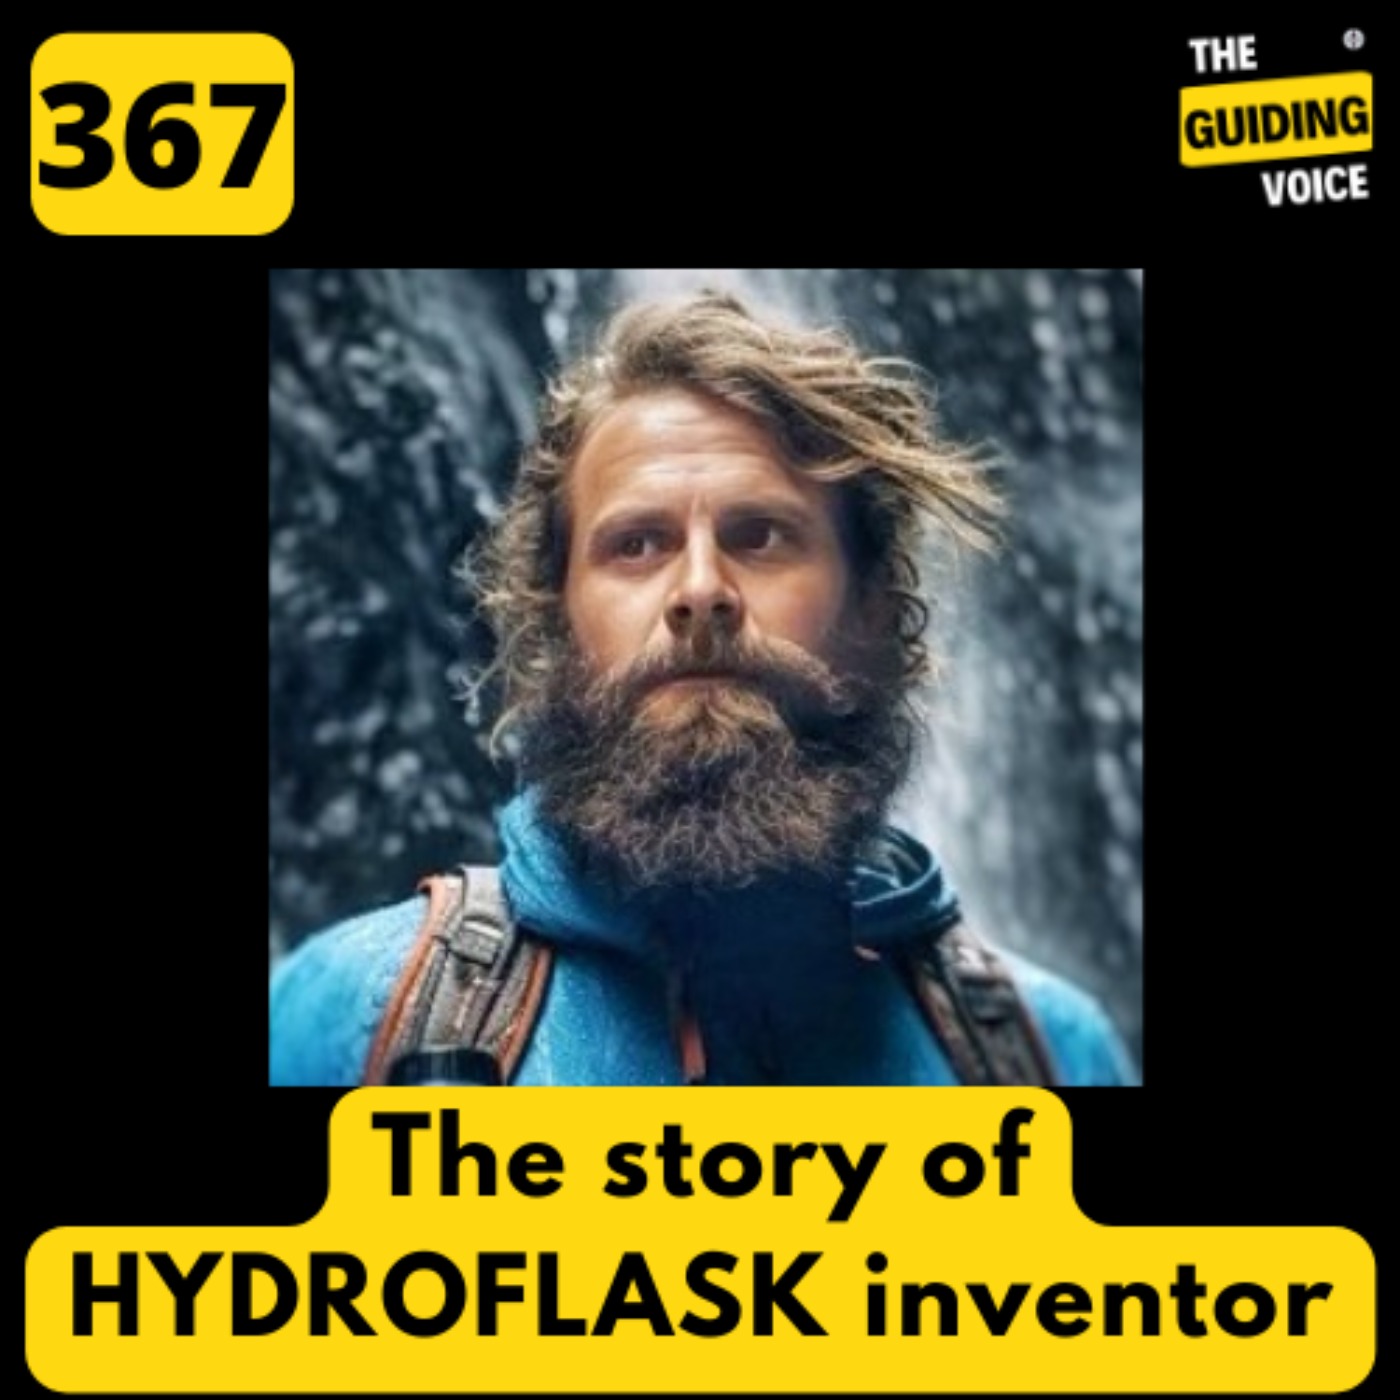 THE entrepreneurial STORY OF THE HYDRO FLASK inventor  | TRAVIS ROSBACH | #TGV367